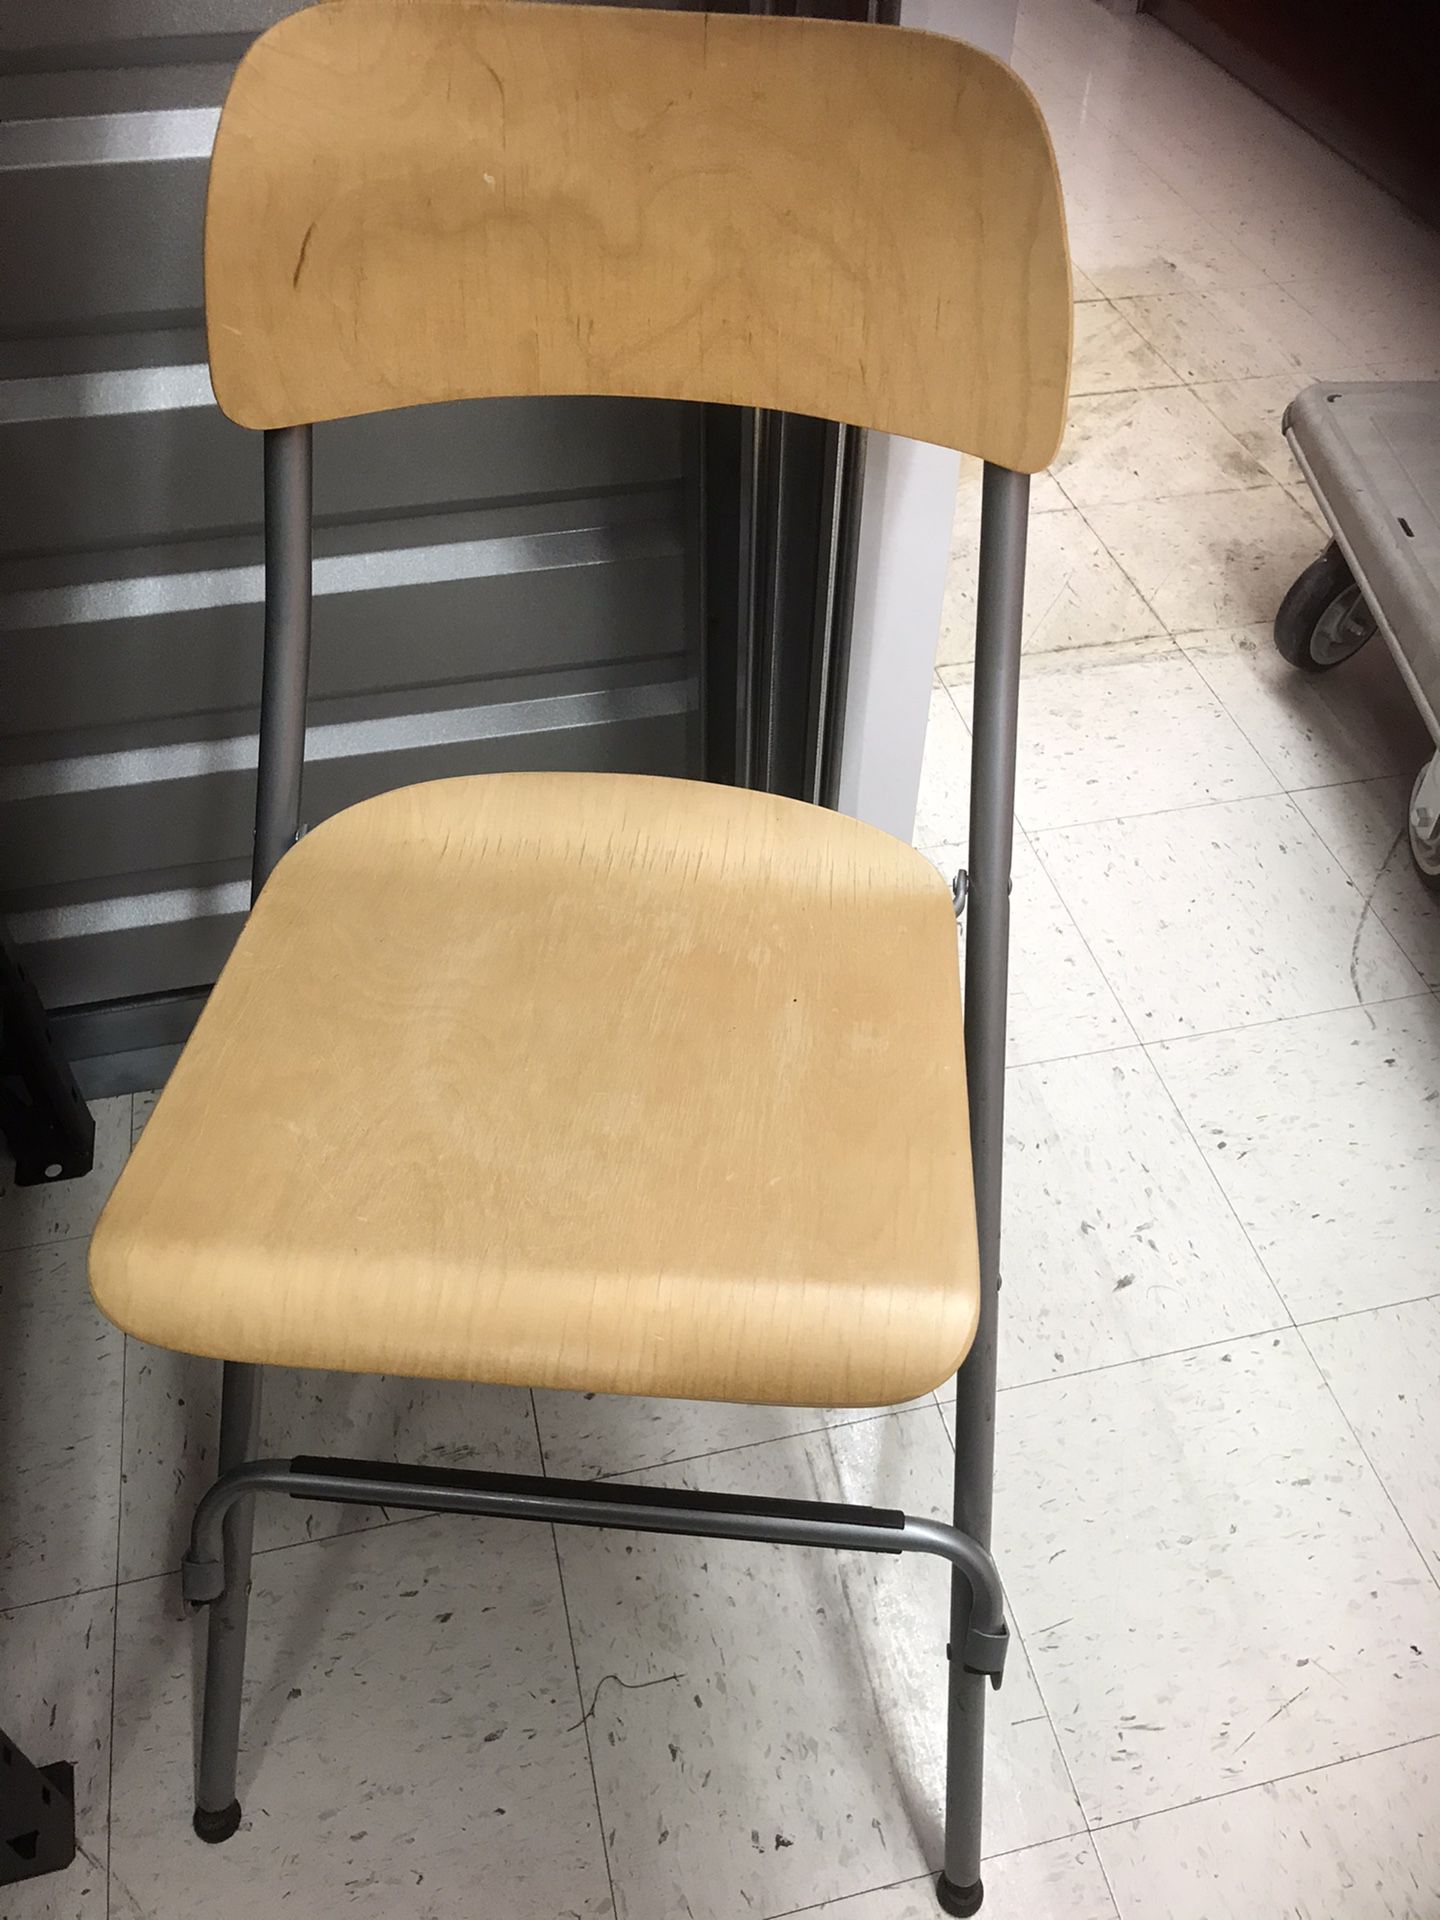 Folding Bar Stool With Foot Rest $15